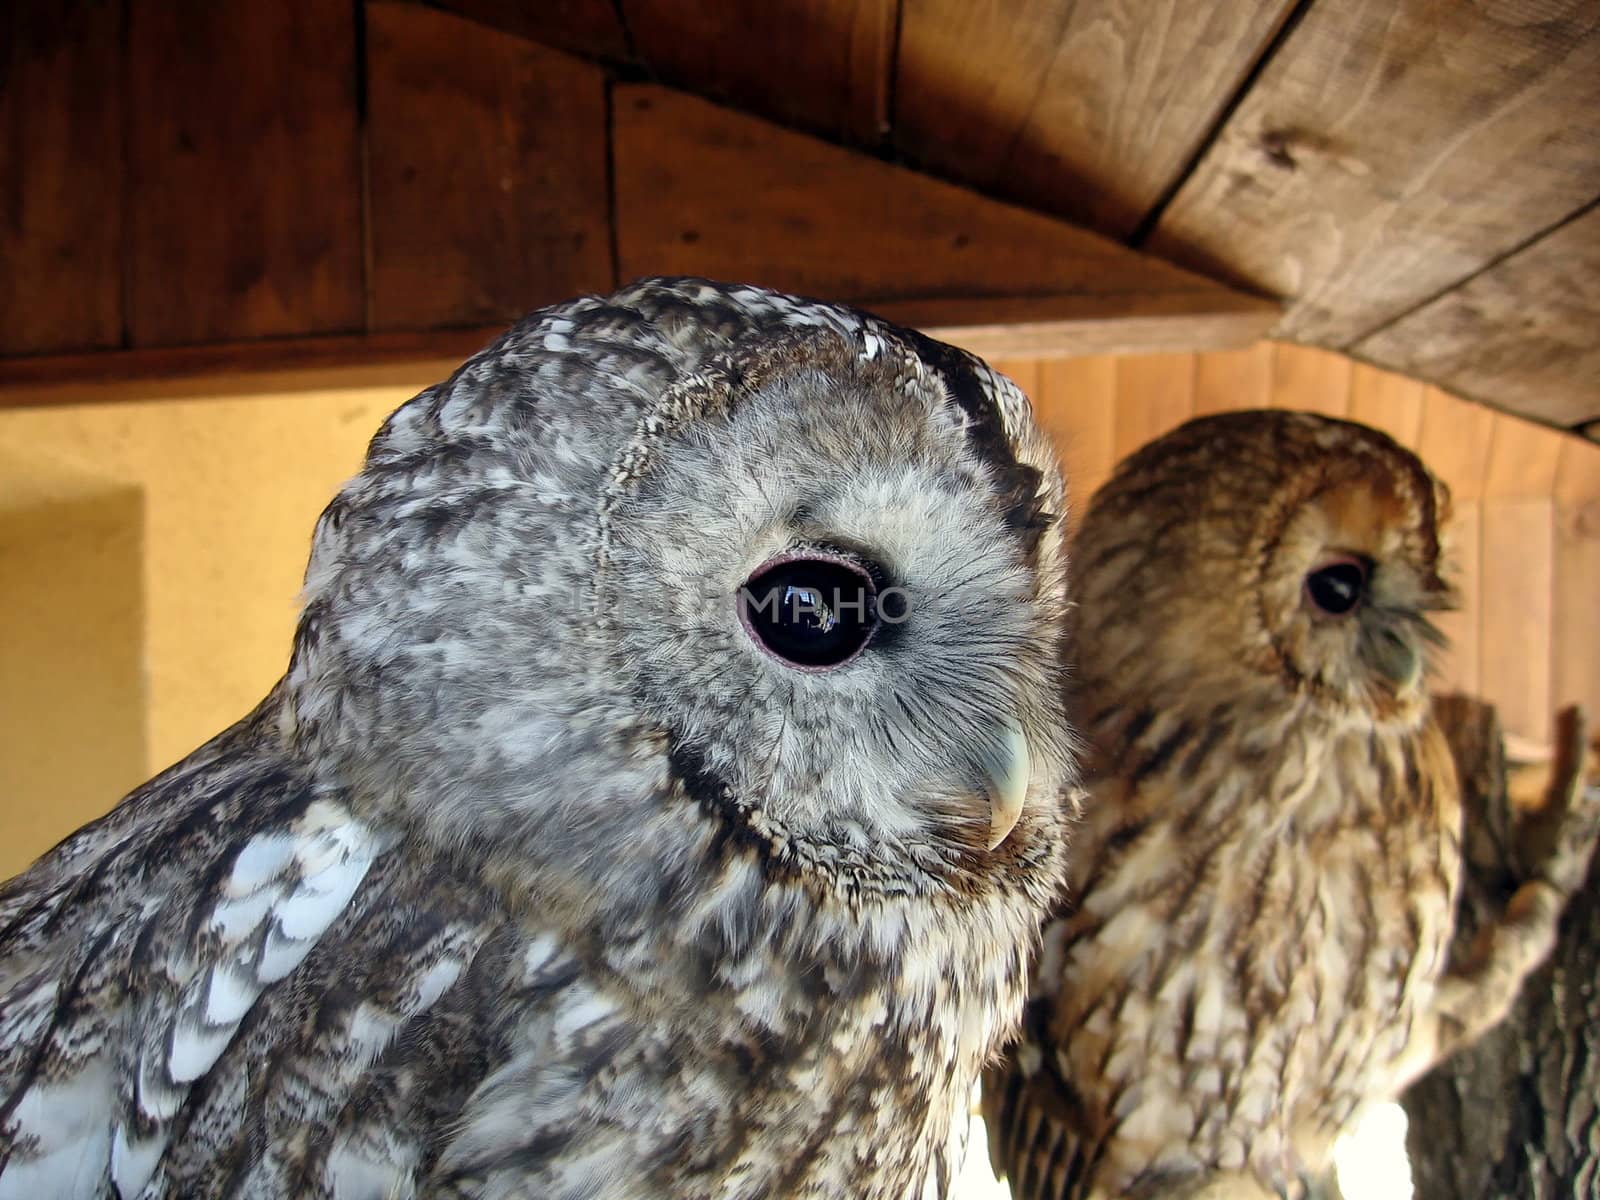 Two nice owls with big black eyes